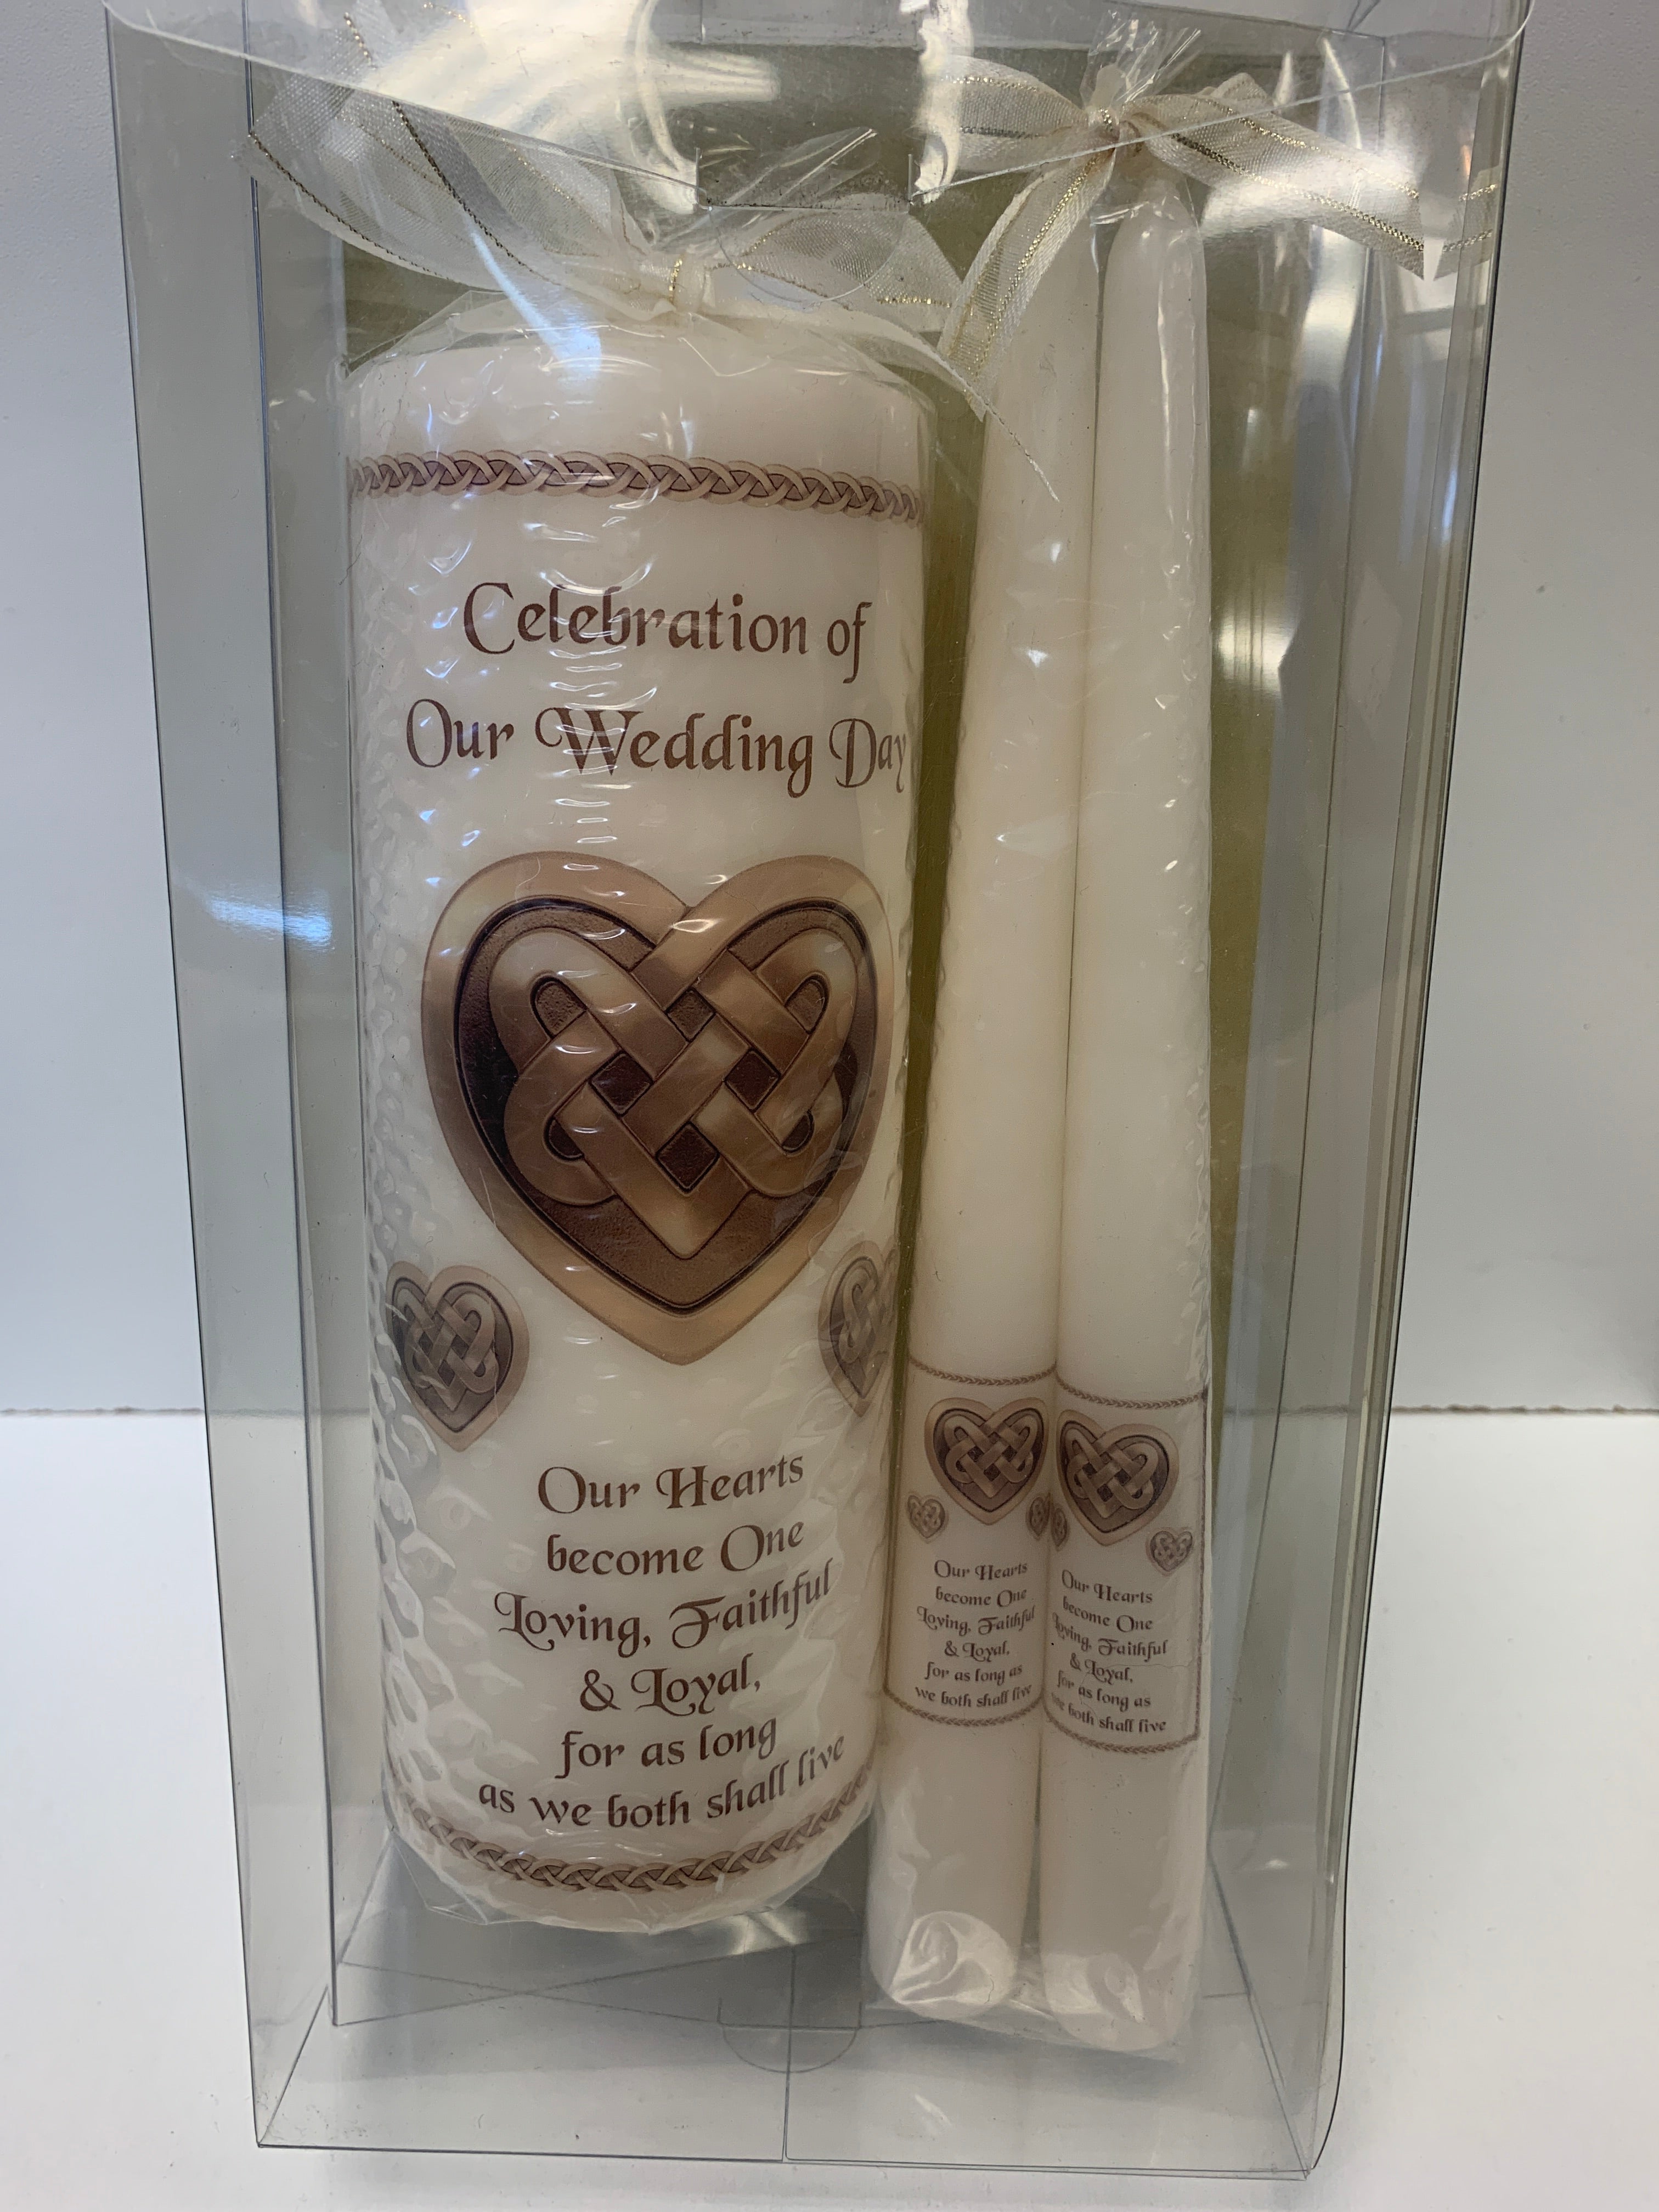 Celebration of Our Wedding Day Candle Set